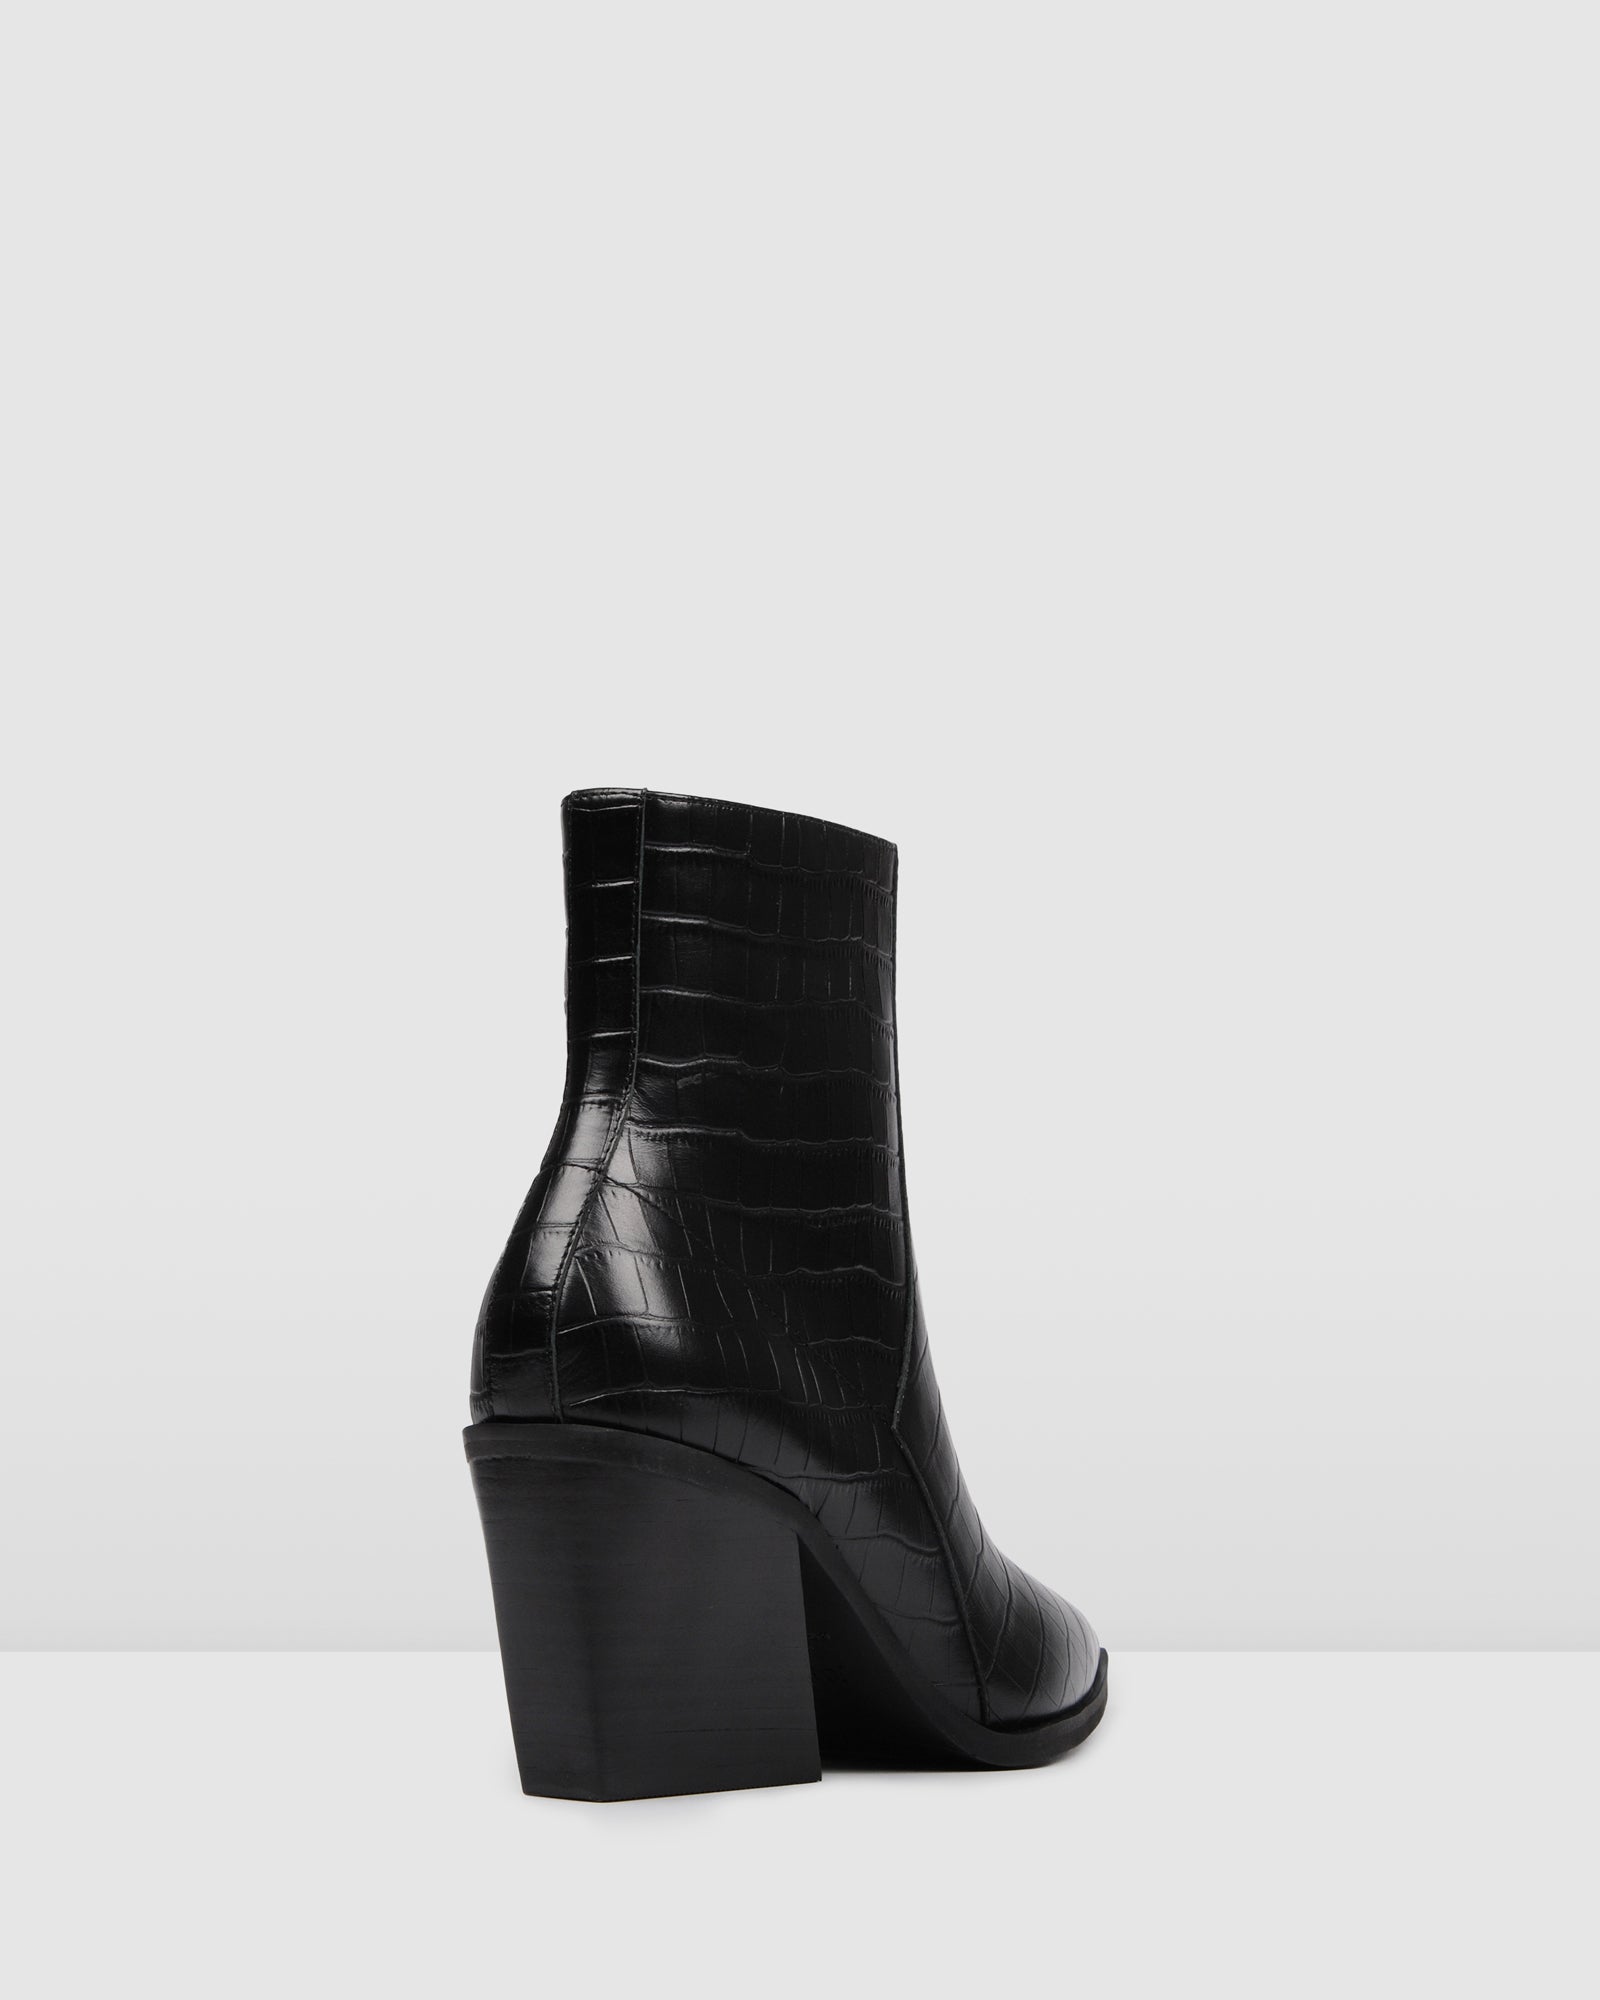 croc leather ankle boots